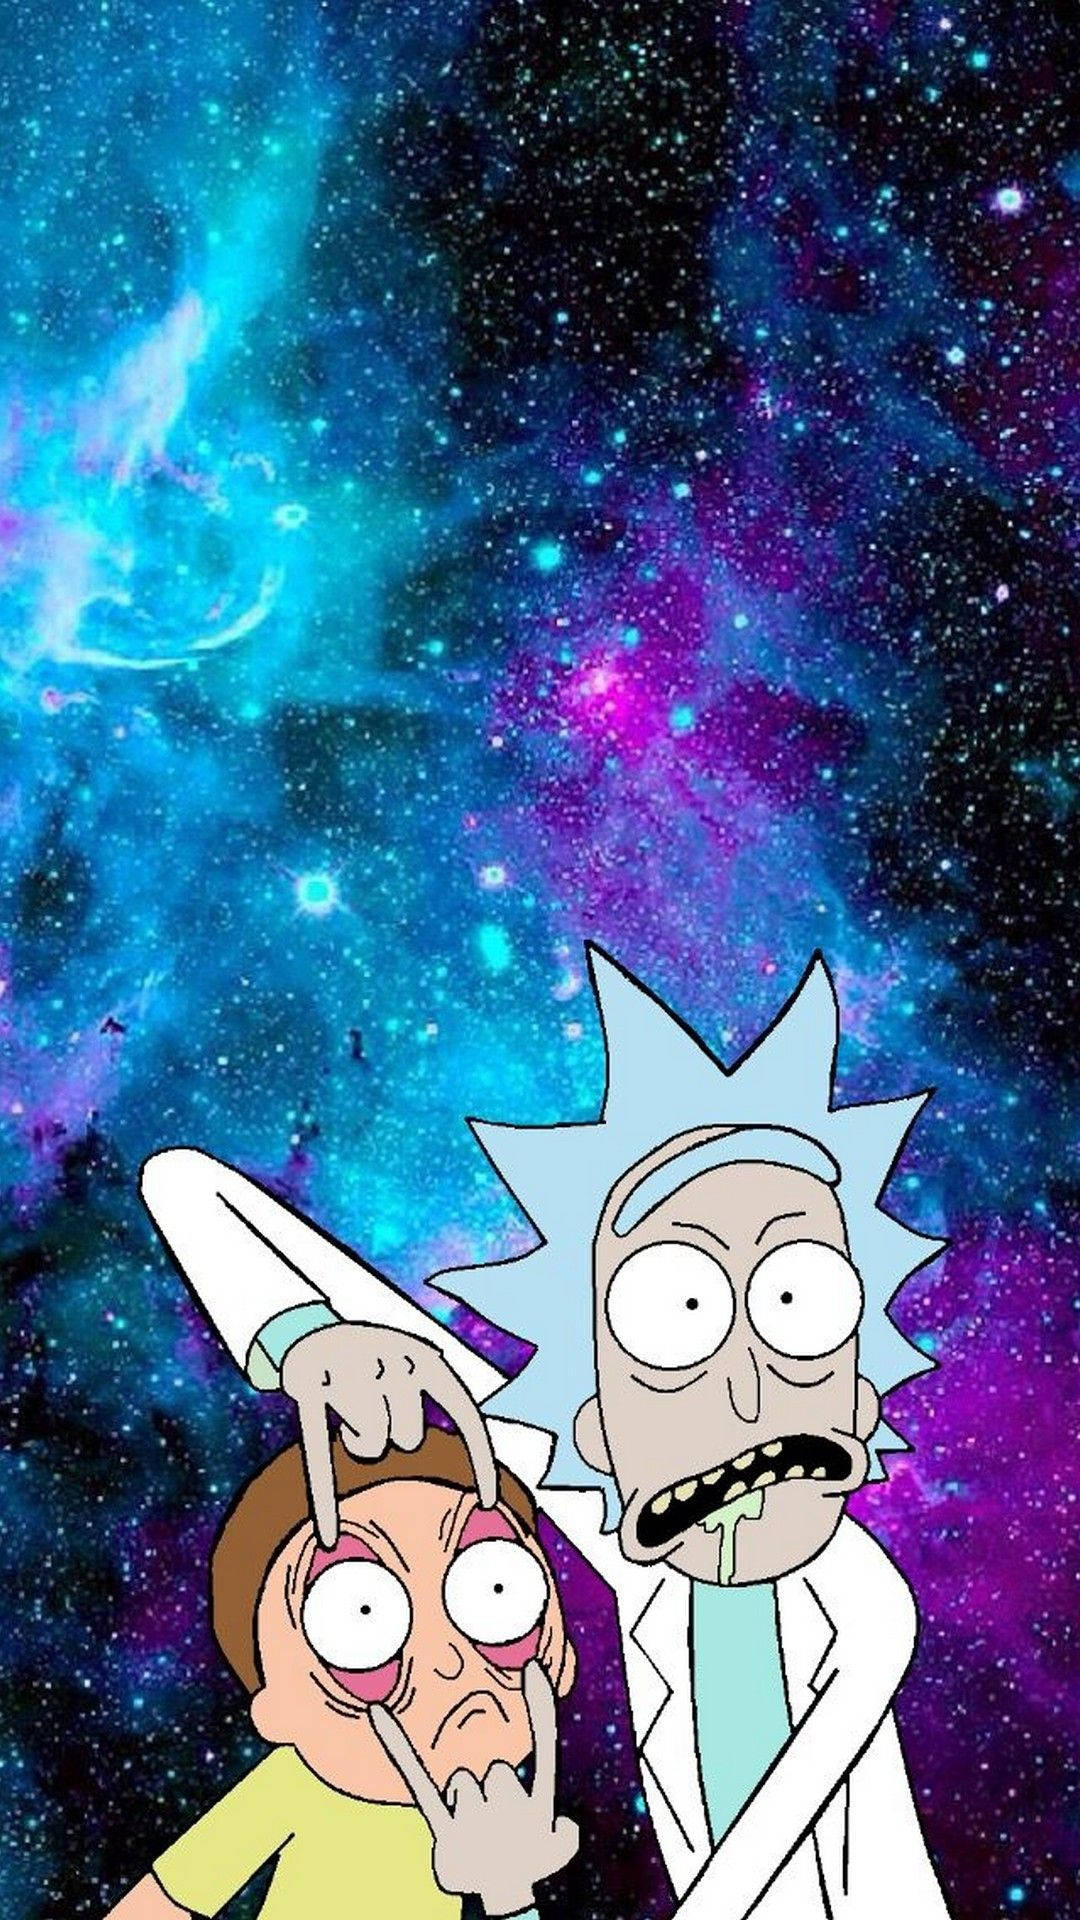 Rick and Morty x Run The Jewels Oh Mama  Adult Swim on Make a GIF